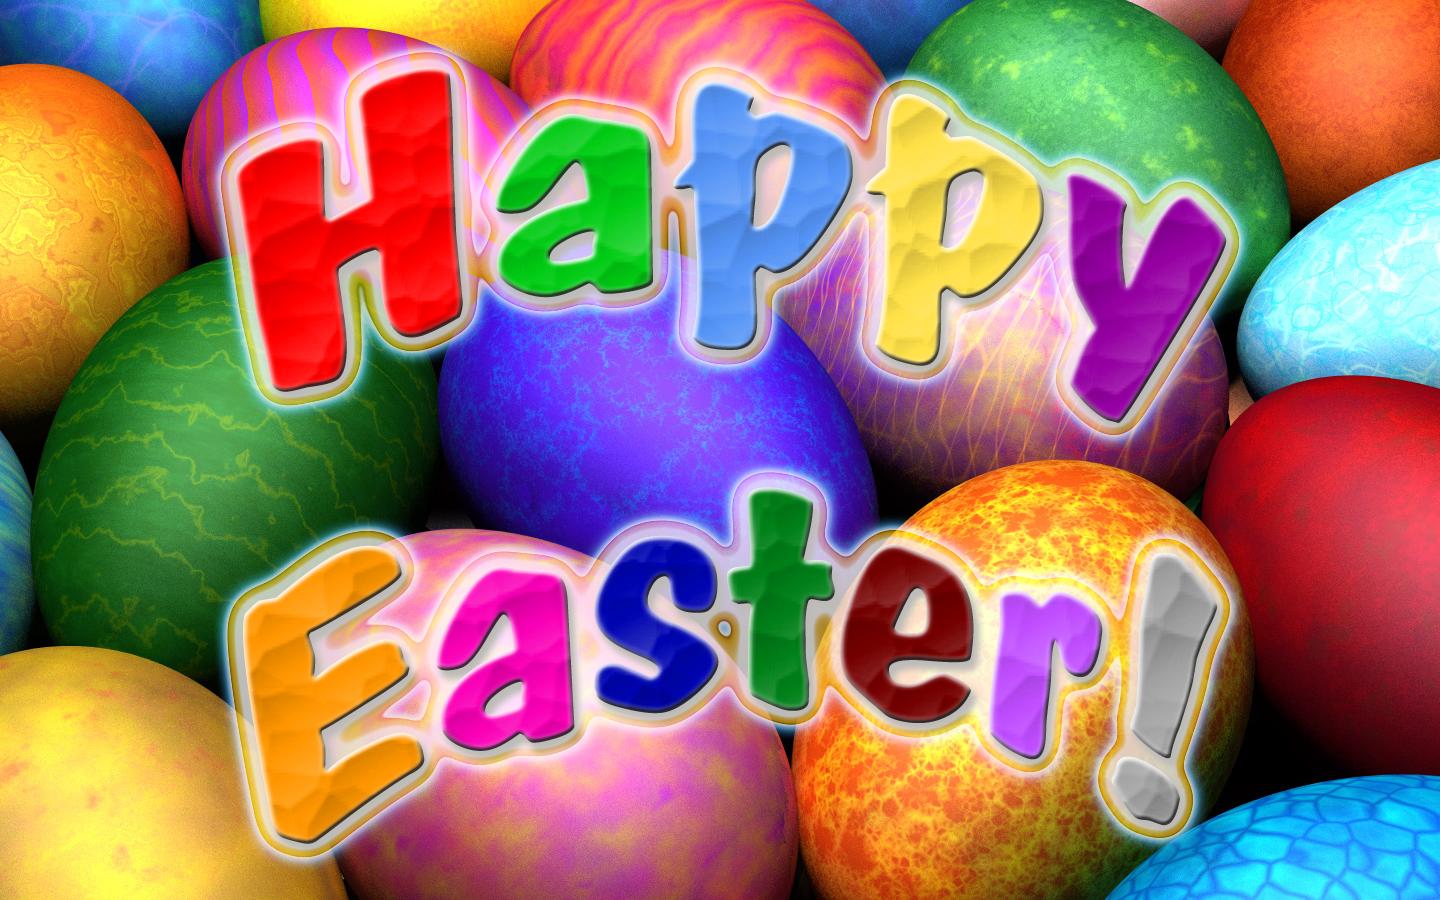 Day Happy Easter To All And Enjoy These Nice Background